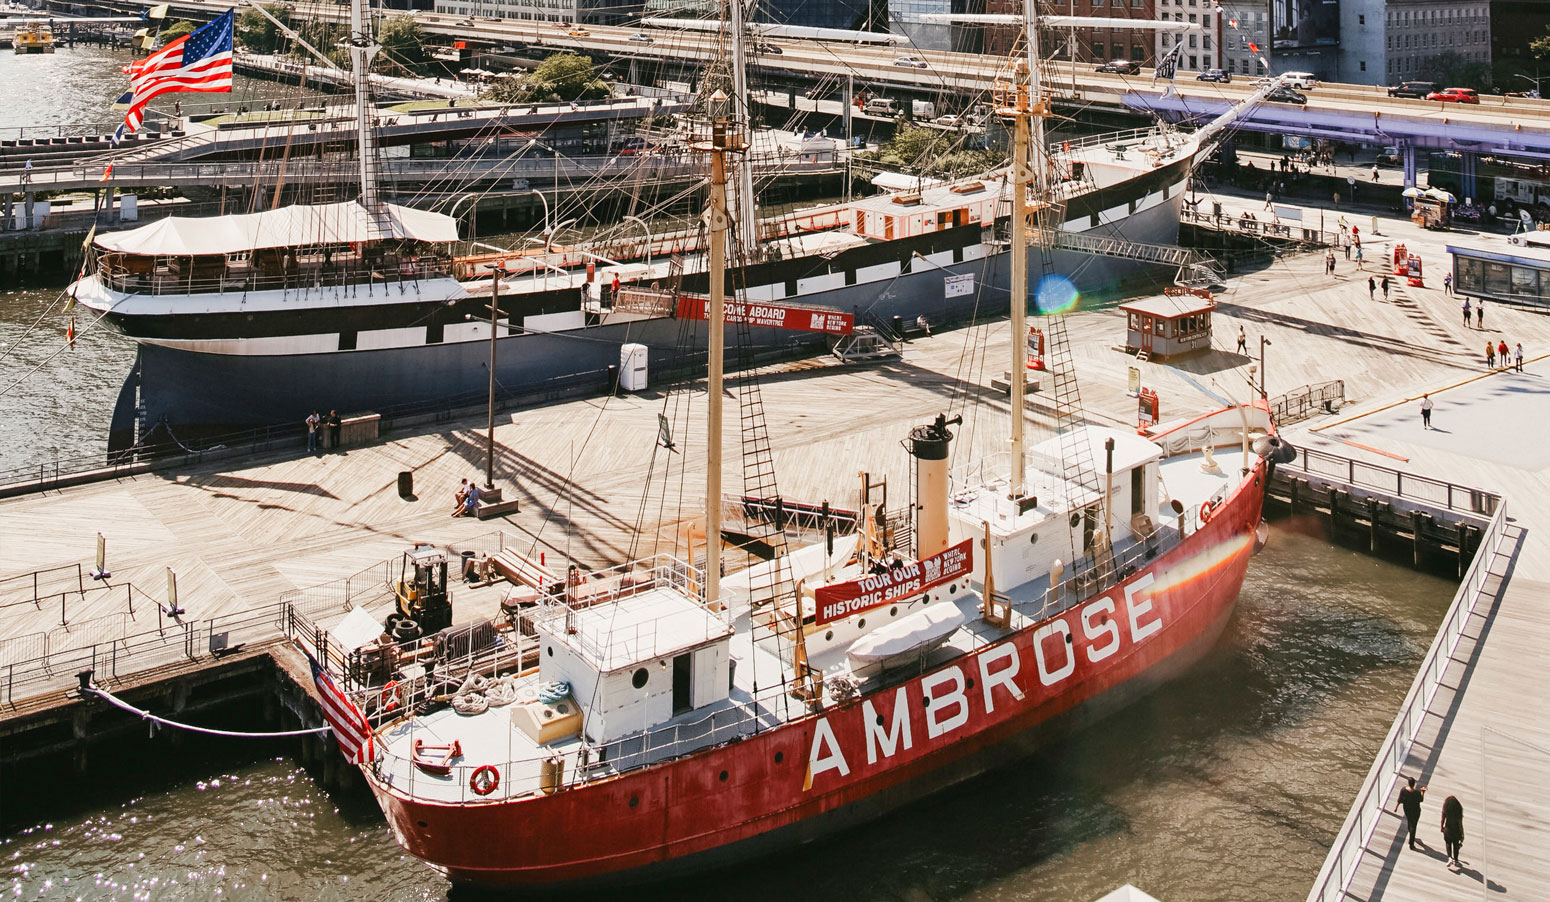 Lightship-Ambrose-at-Pier-17-South-Street-Seaport-Museum-80-Pine